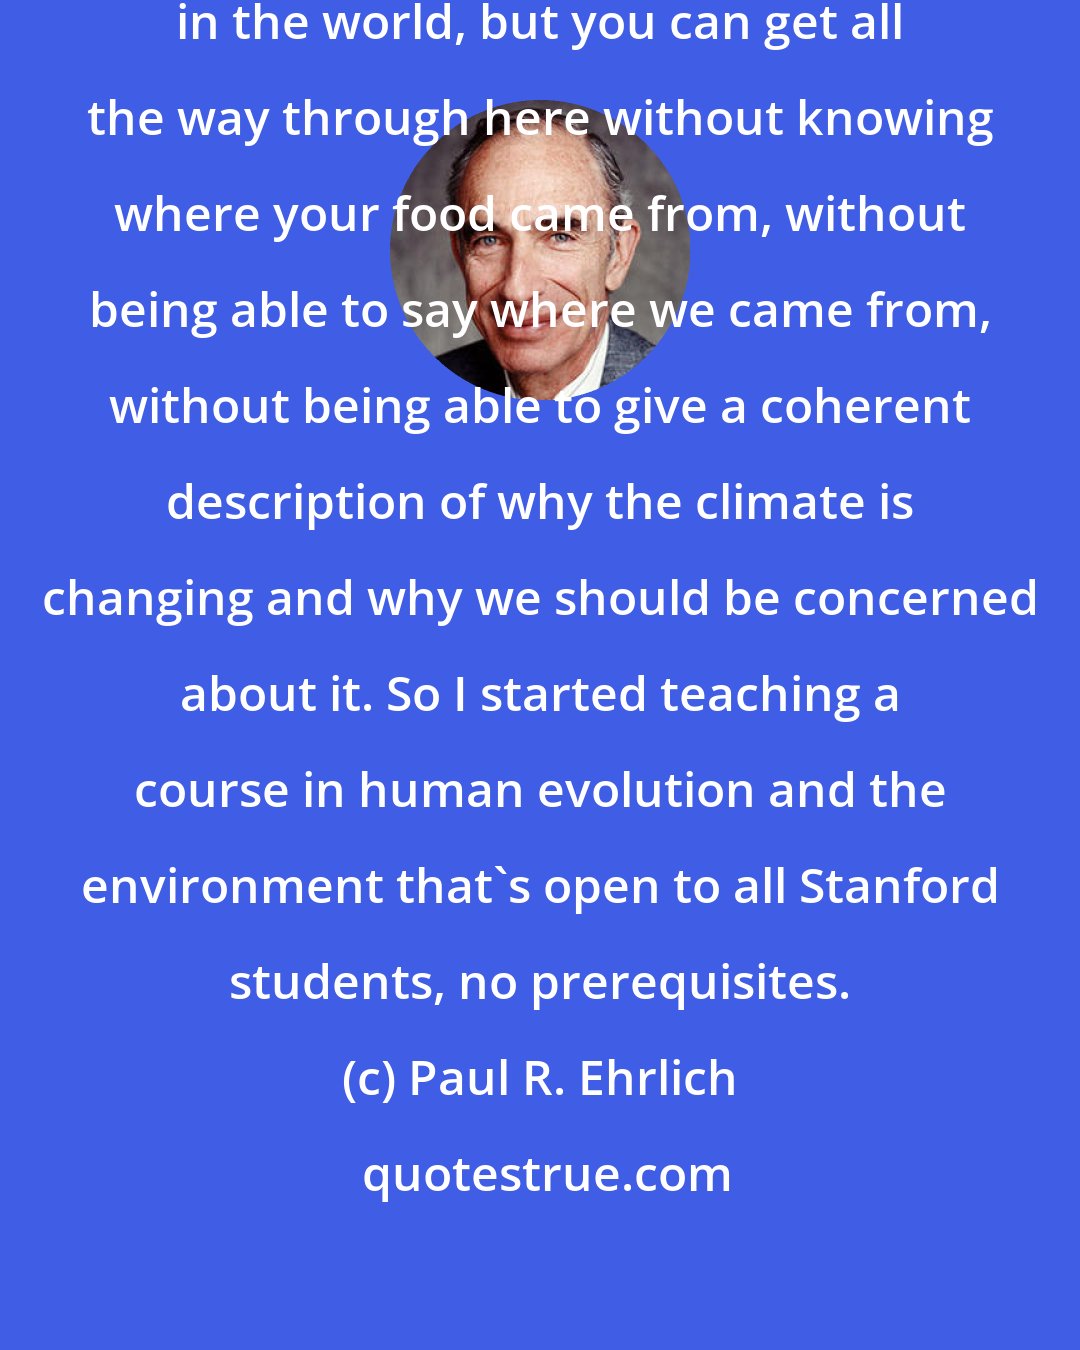 Paul R. Ehrlich: Stanford may be the best university in the world, but you can get all the way through here without knowing where your food came from, without being able to say where we came from, without being able to give a coherent description of why the climate is changing and why we should be concerned about it. So I started teaching a course in human evolution and the environment that's open to all Stanford students, no prerequisites.